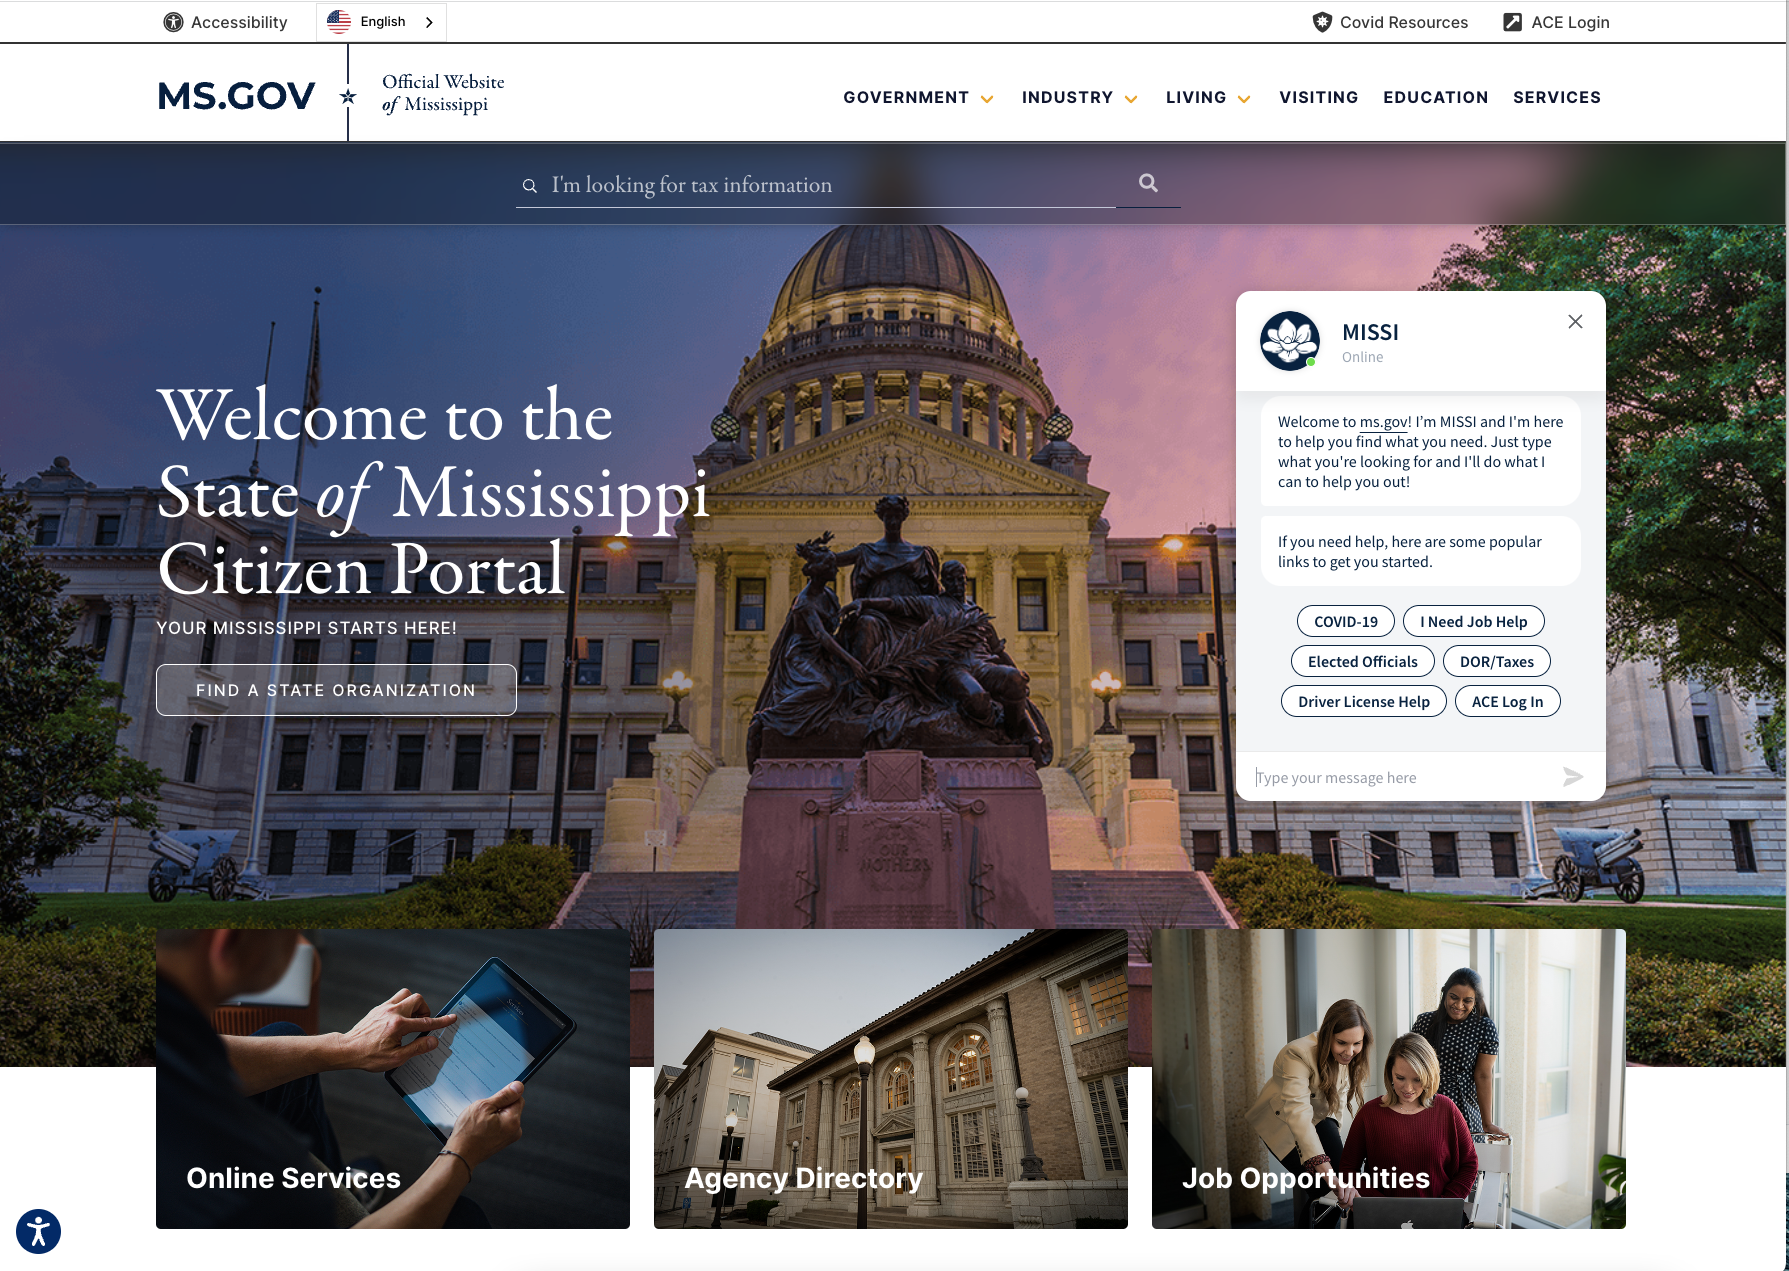 ms.gov - The Official Website of the State of Mississippi